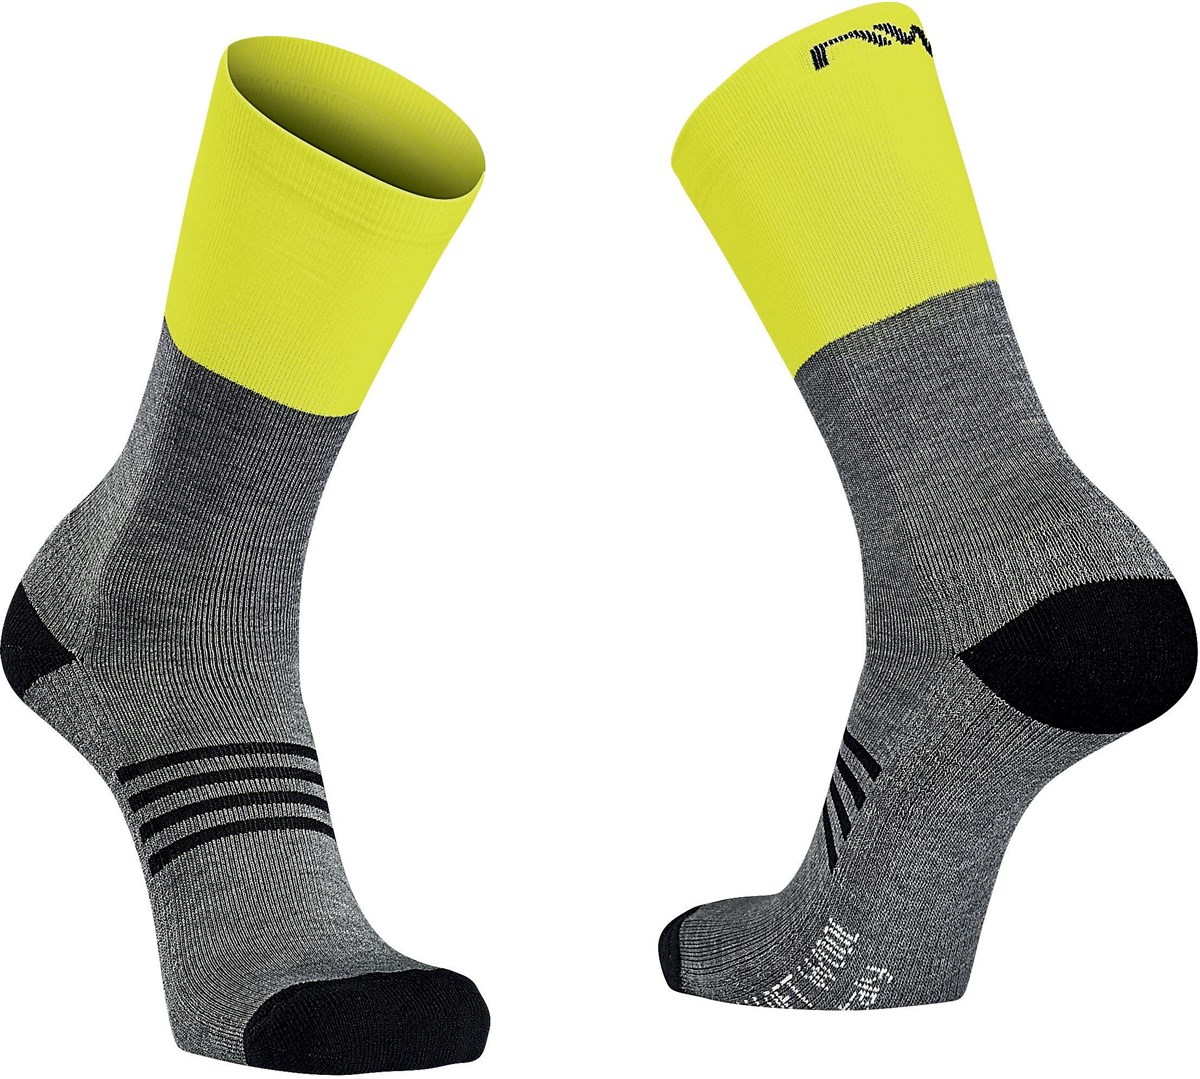 Northwave Extreme Pro High Cycling Socks product image